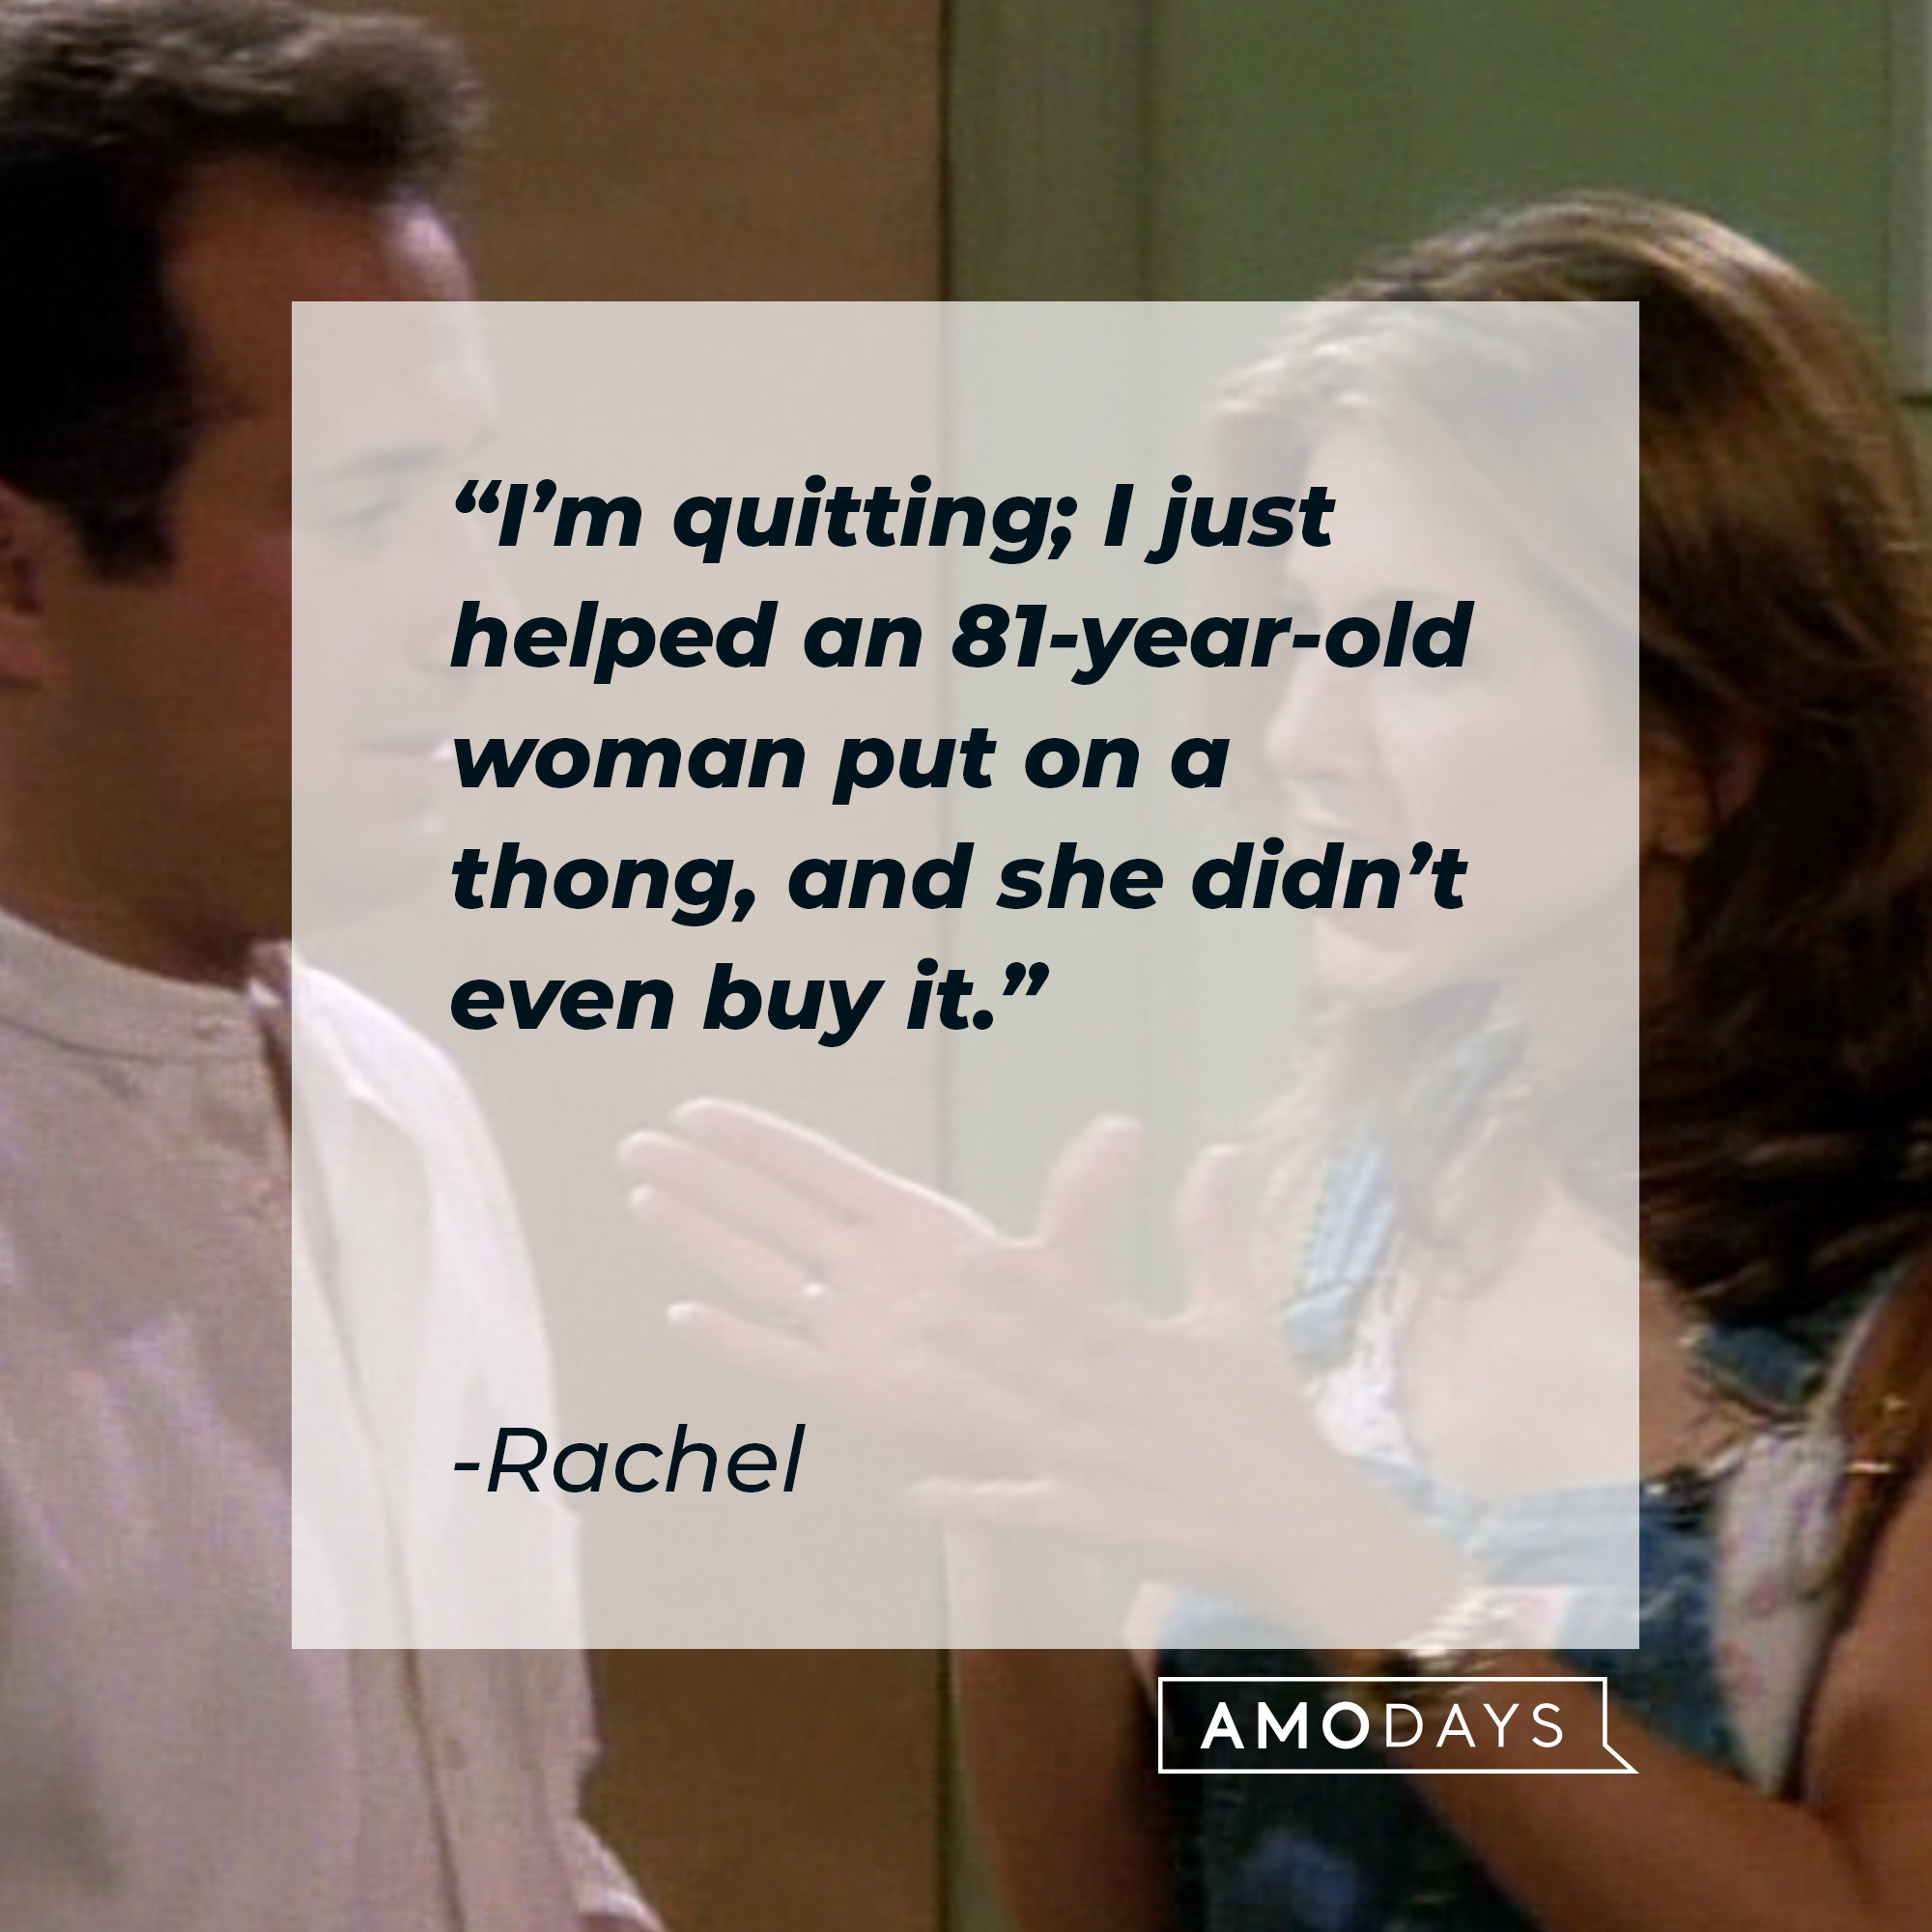 Rachel's quote: “I’m quitting; I just helped an 81-year-old woman put on a thong, and she didn’t even buy it.” | Source: facebook.com/friends.tv